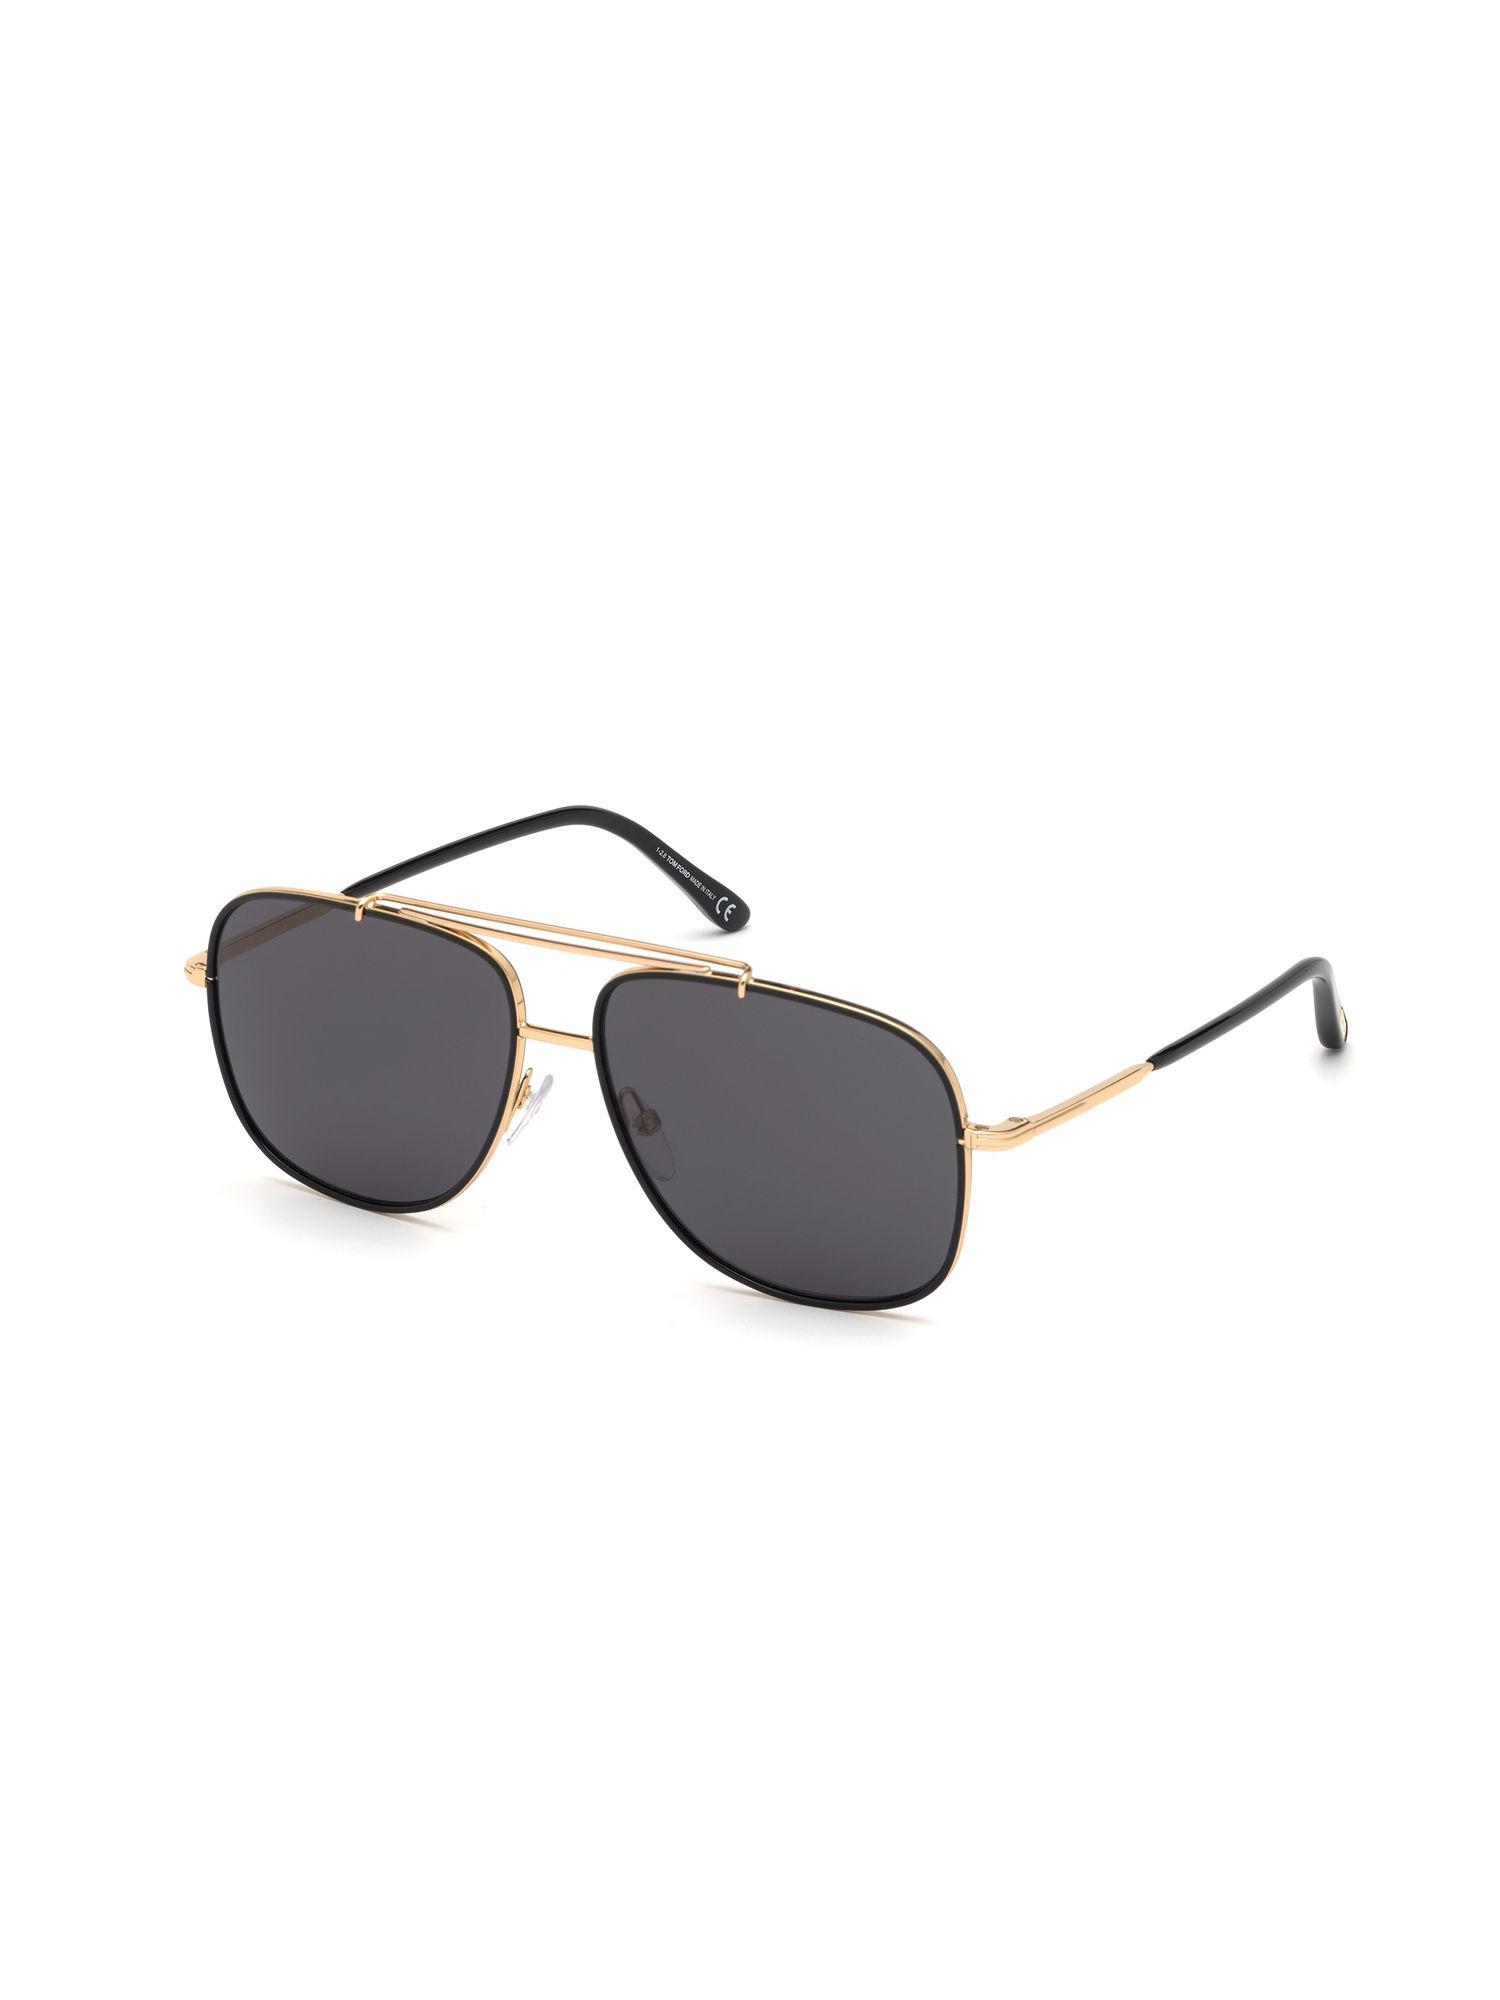 gold-round-sunglasses---ft0693-58-30a